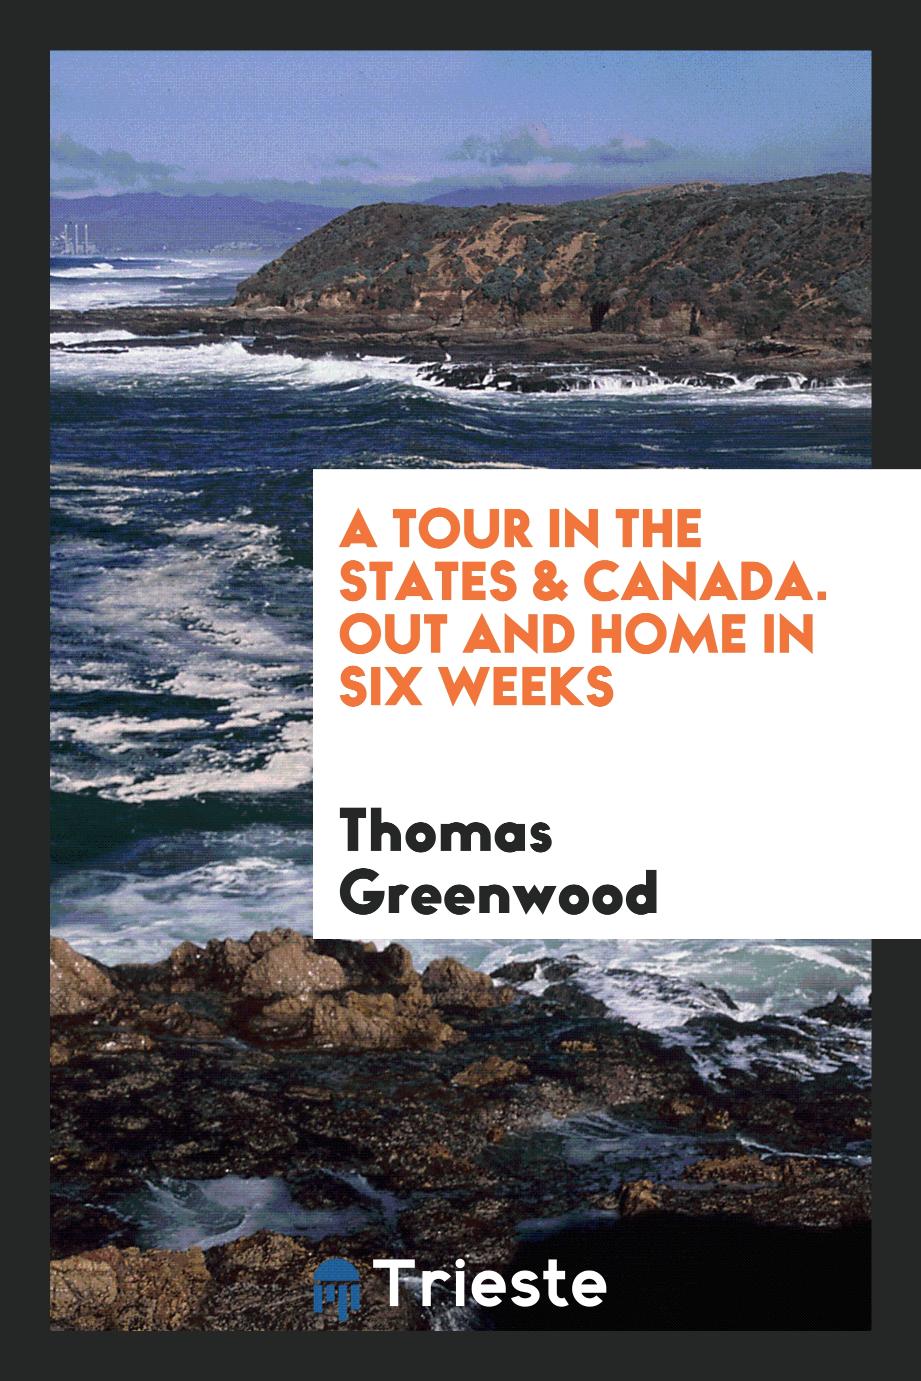 A tour in the states & Canada. Out and home in six weeks